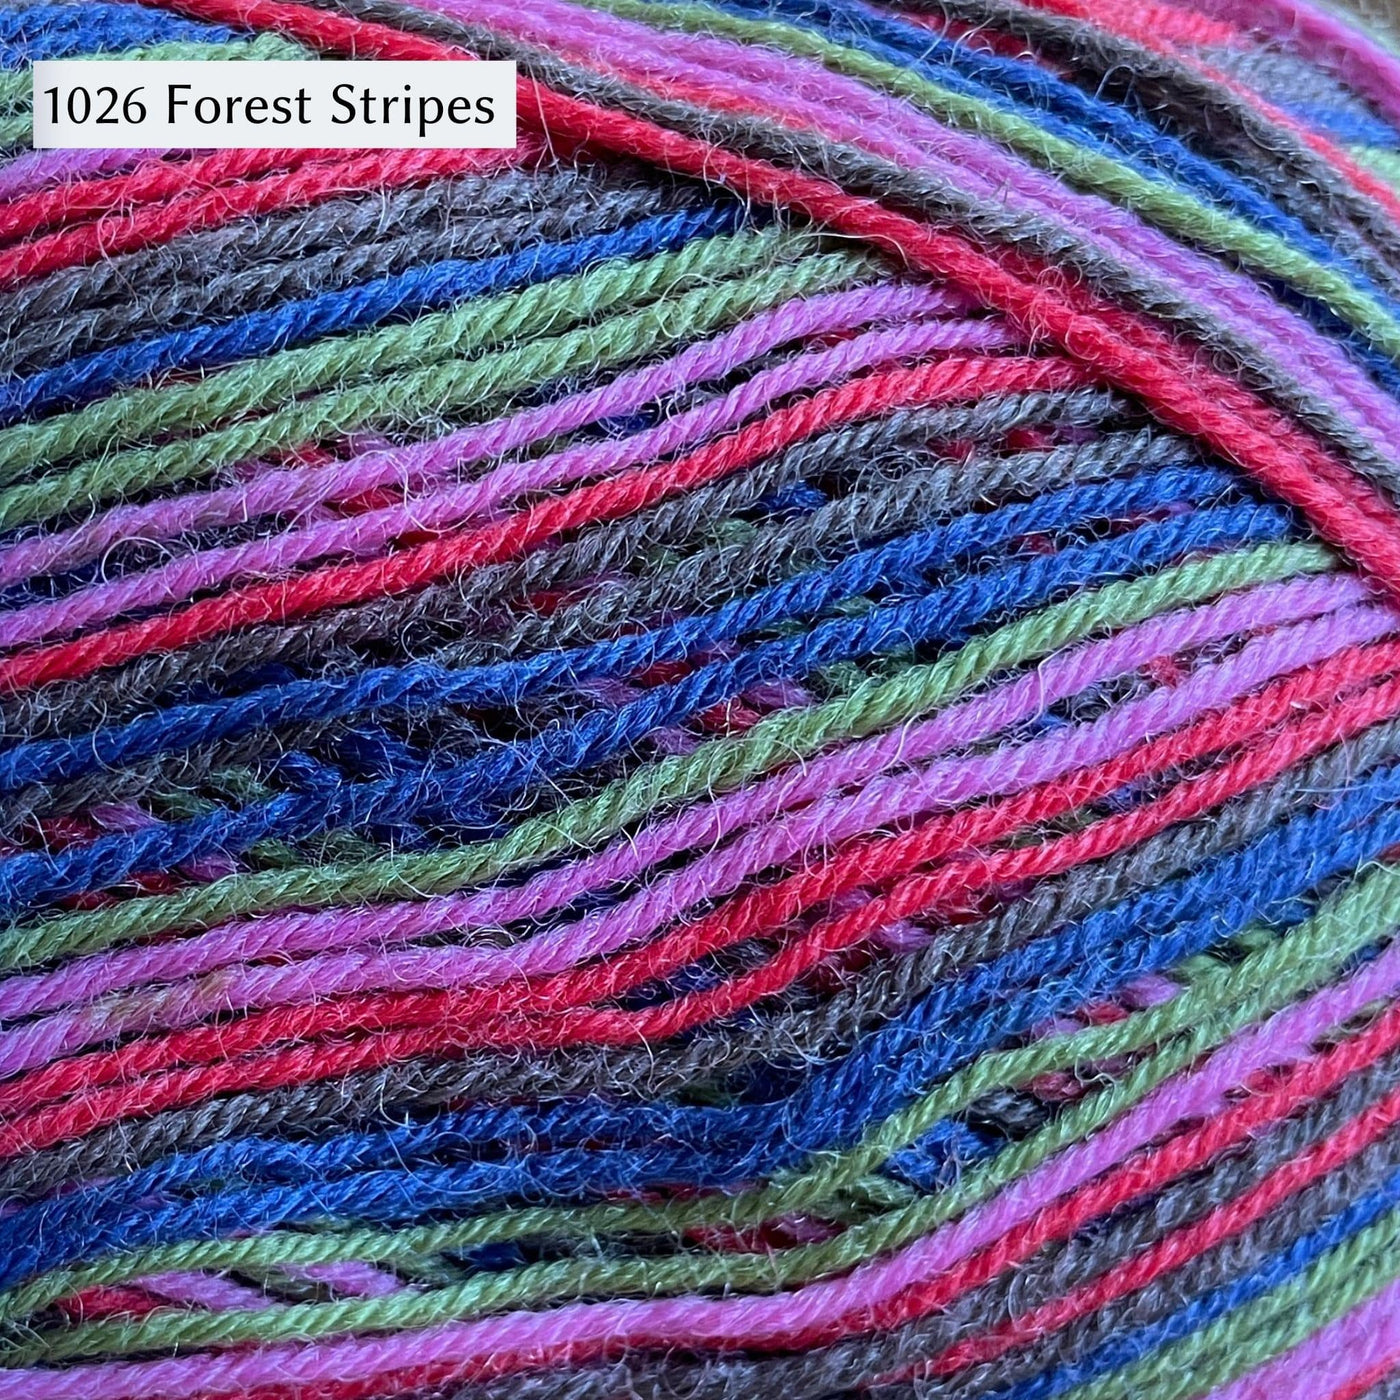 West Yorkshire Spinners Signature 4ply yarn, fingering weight, in color 1026 Forest Stripes, with even stripes of royal blue, light green, grey, pink, and red